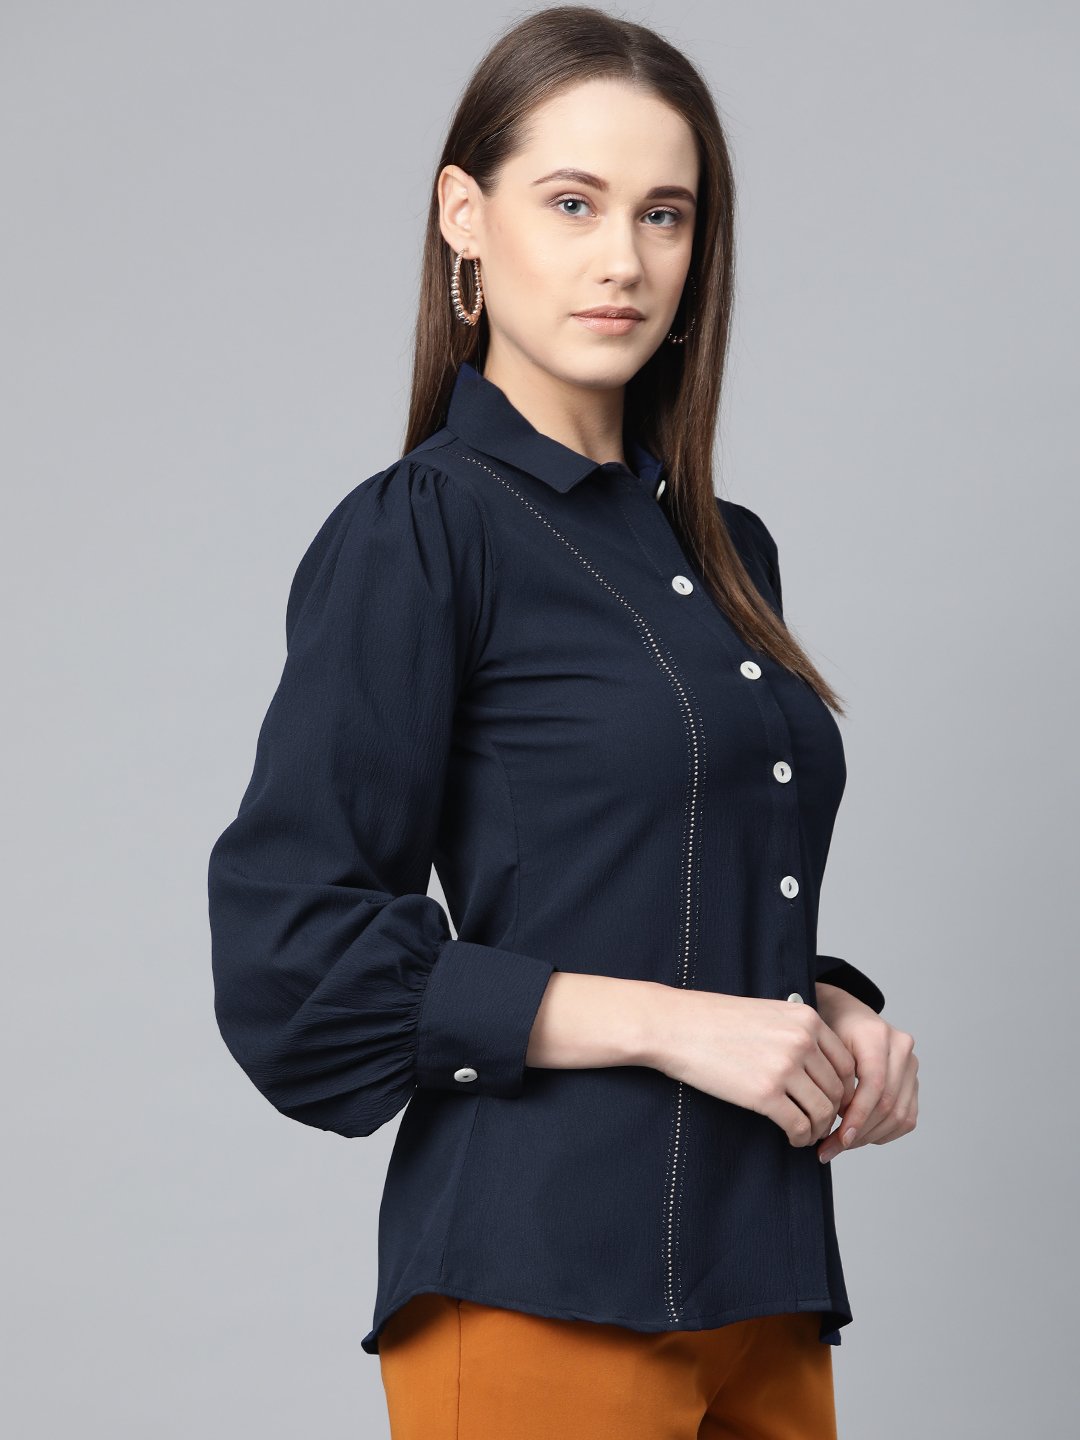 Women's Navy Blue Regular Fit Crinkled Effect Casual Shirt - Jompers